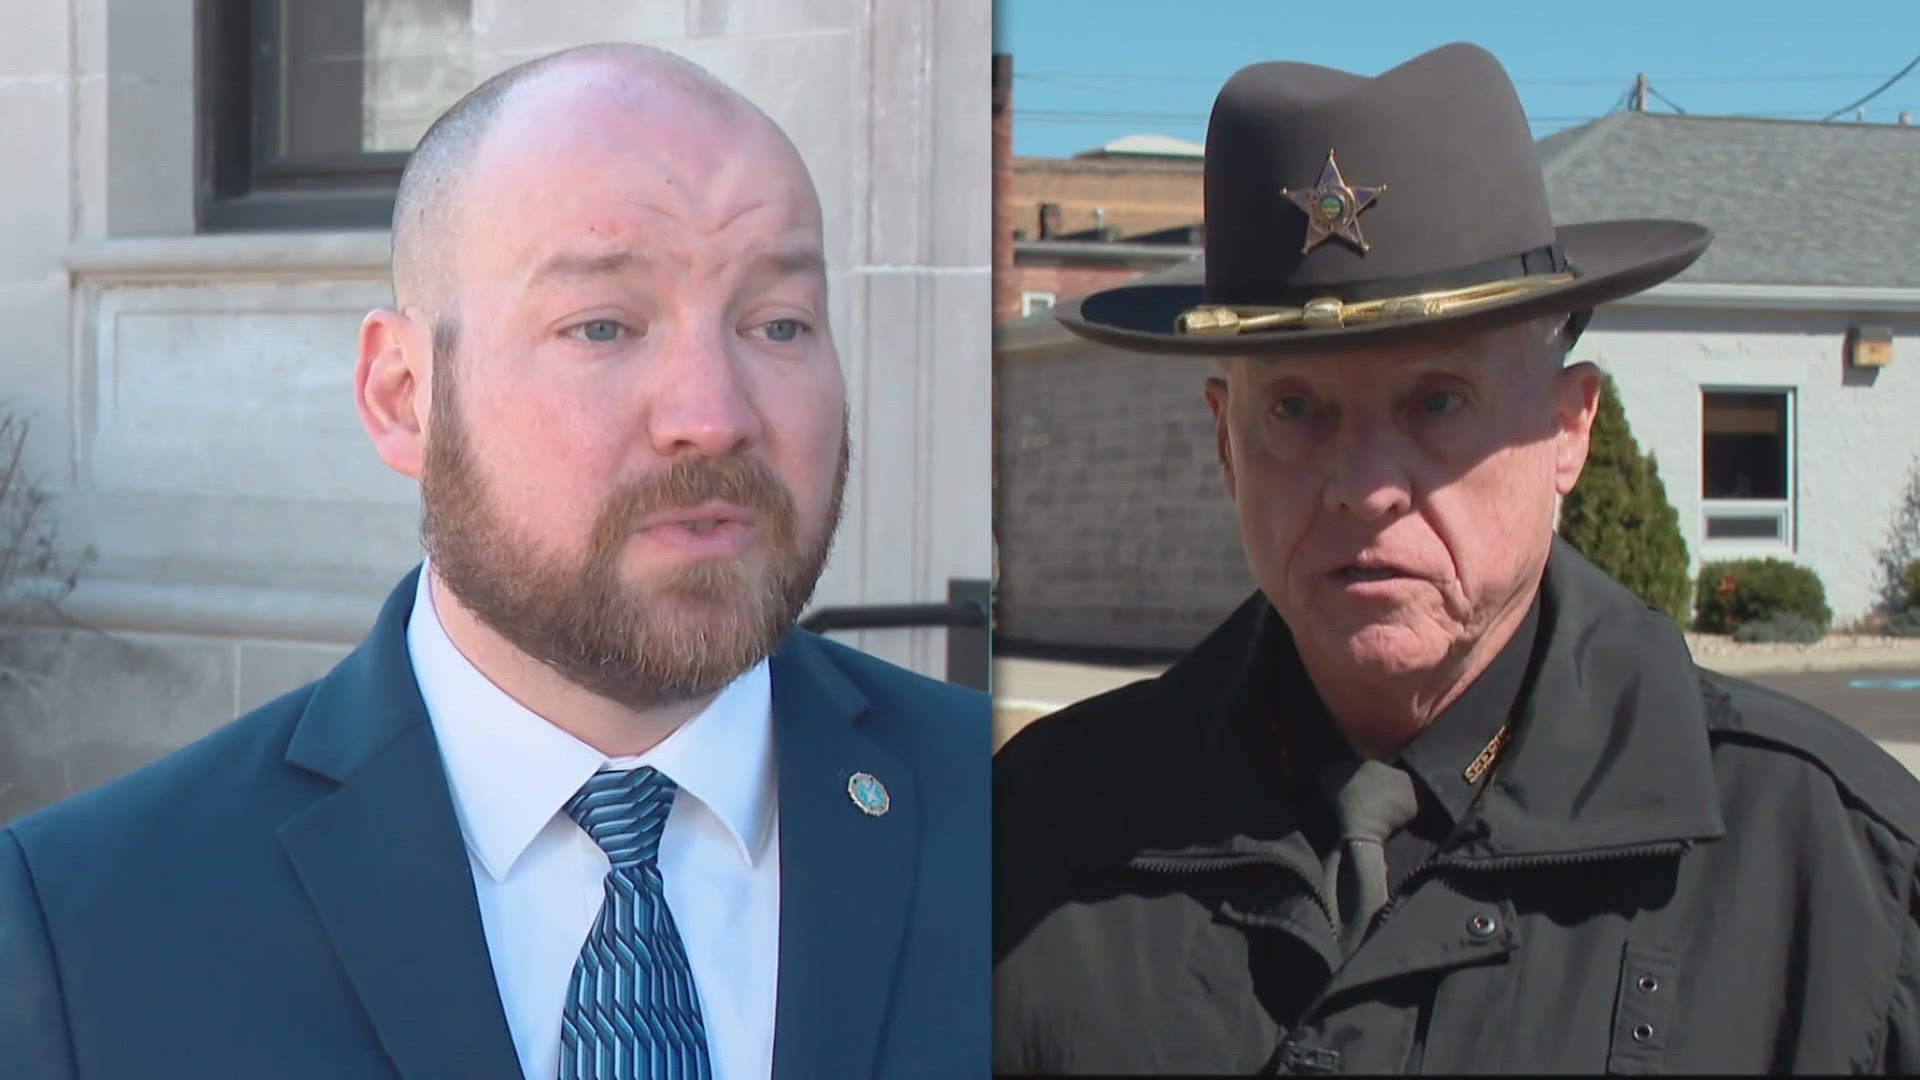 Former Hocking County Sheriff Chief Deputy Caleb Moritz, who was indicted by a grand jury last year, is running against longtime sheriff Lanny North.